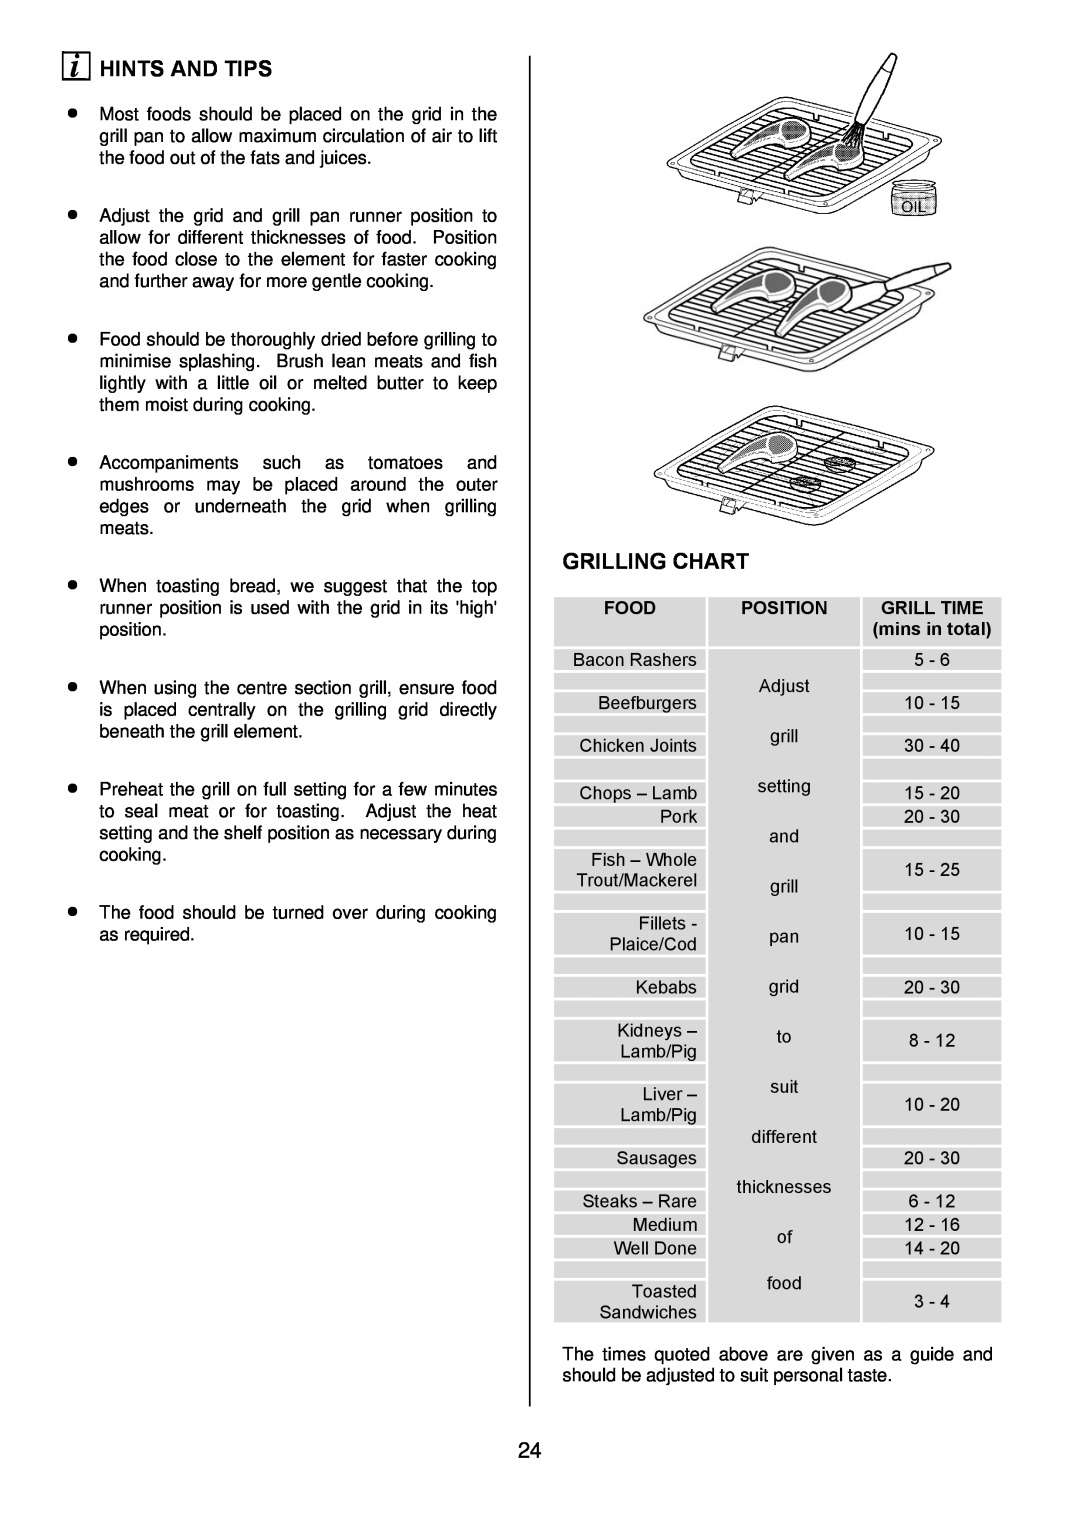 Zanussi ZOD 890 manual Hints And Tips, Grilling Chart, Food, Position, GRILL TIME mins in total 